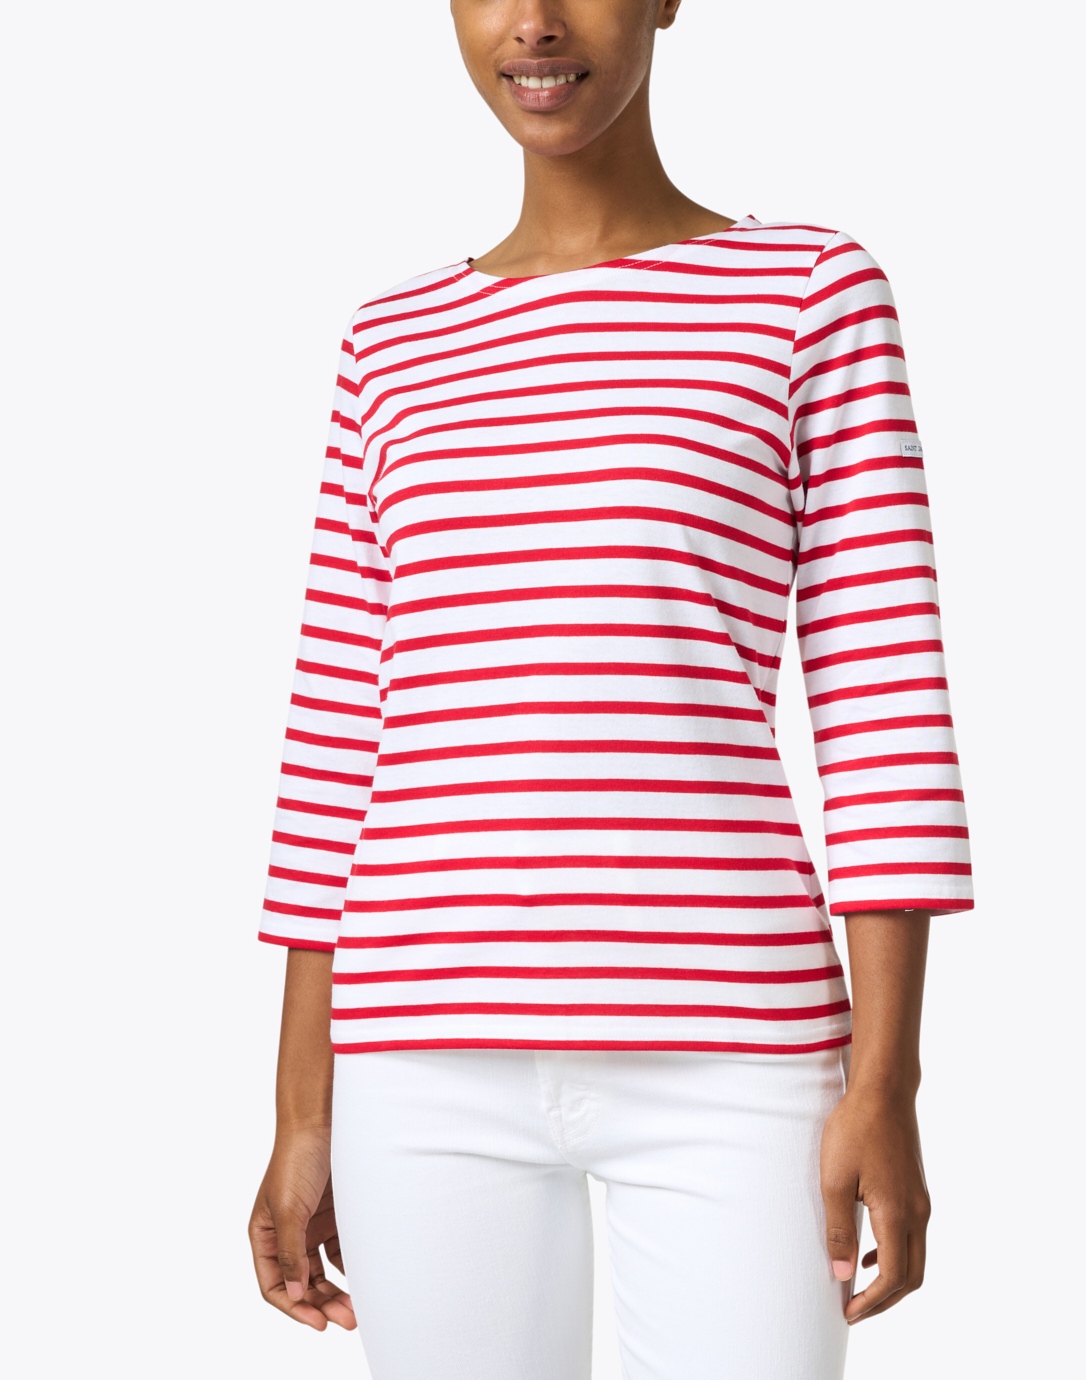 Portico Beregn Bunke af Galathee White and Red Striped Shirt | Saint James